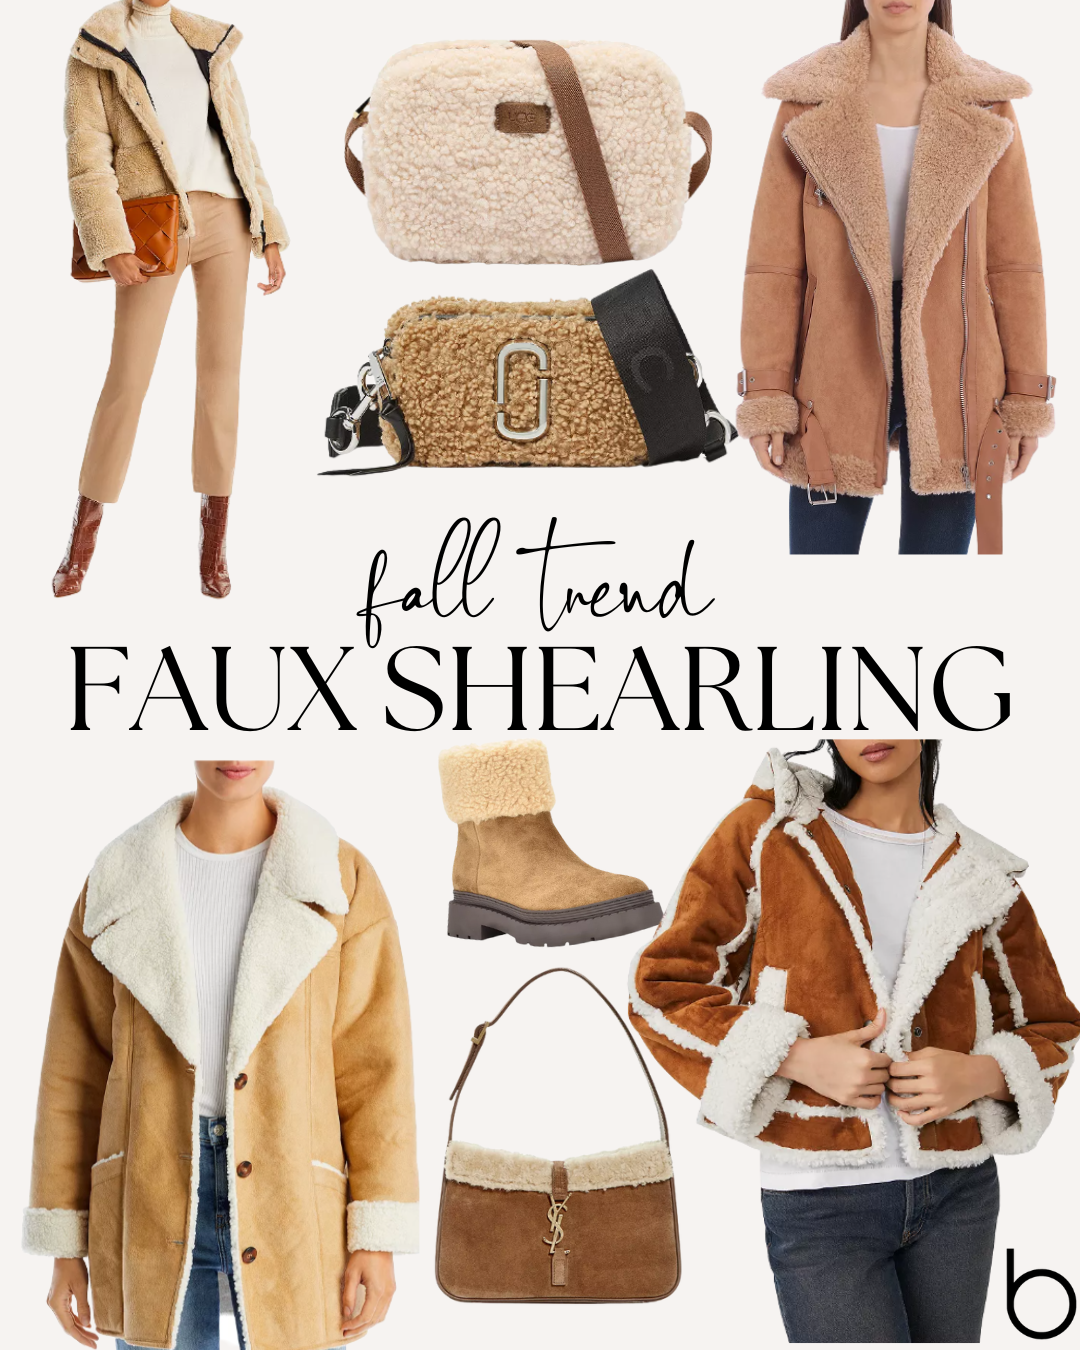 Fall Trends at Bloomingdales | New Fall Fashion Finds at Bloomingdales | Bloomingdale's Designer Clothing for Fall 2022